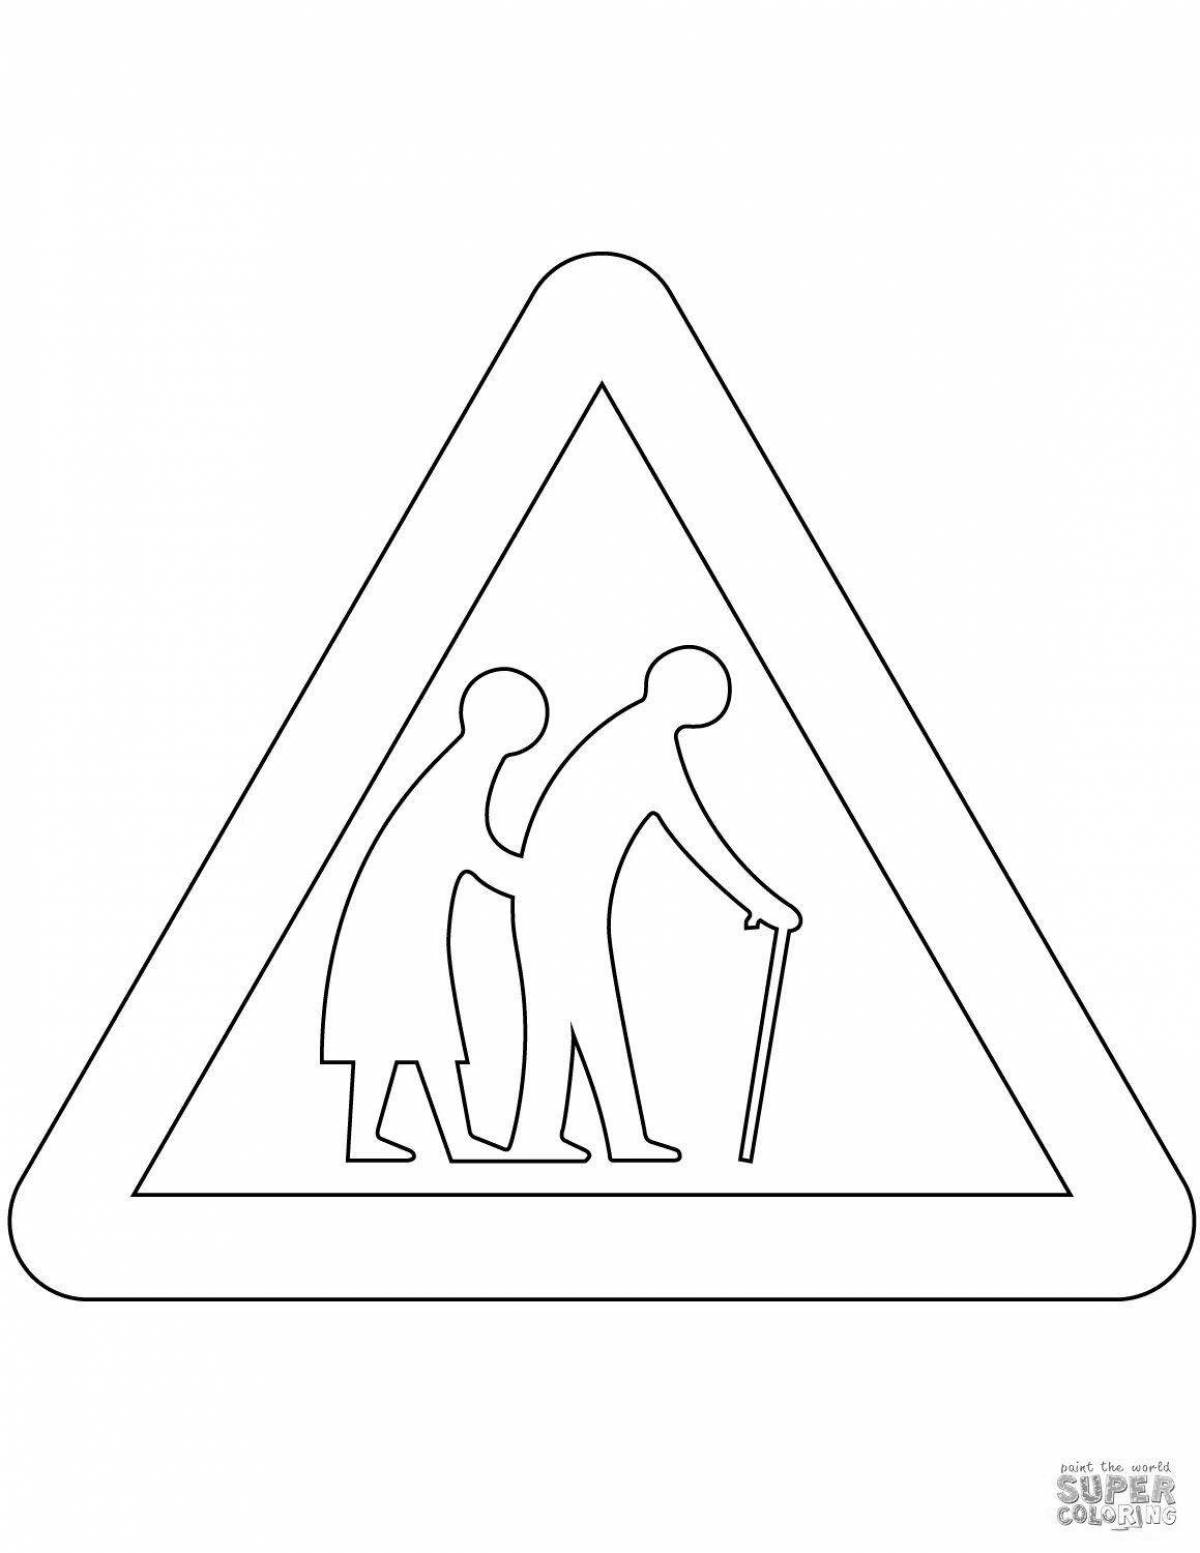 Caution, children, road sign coloring page